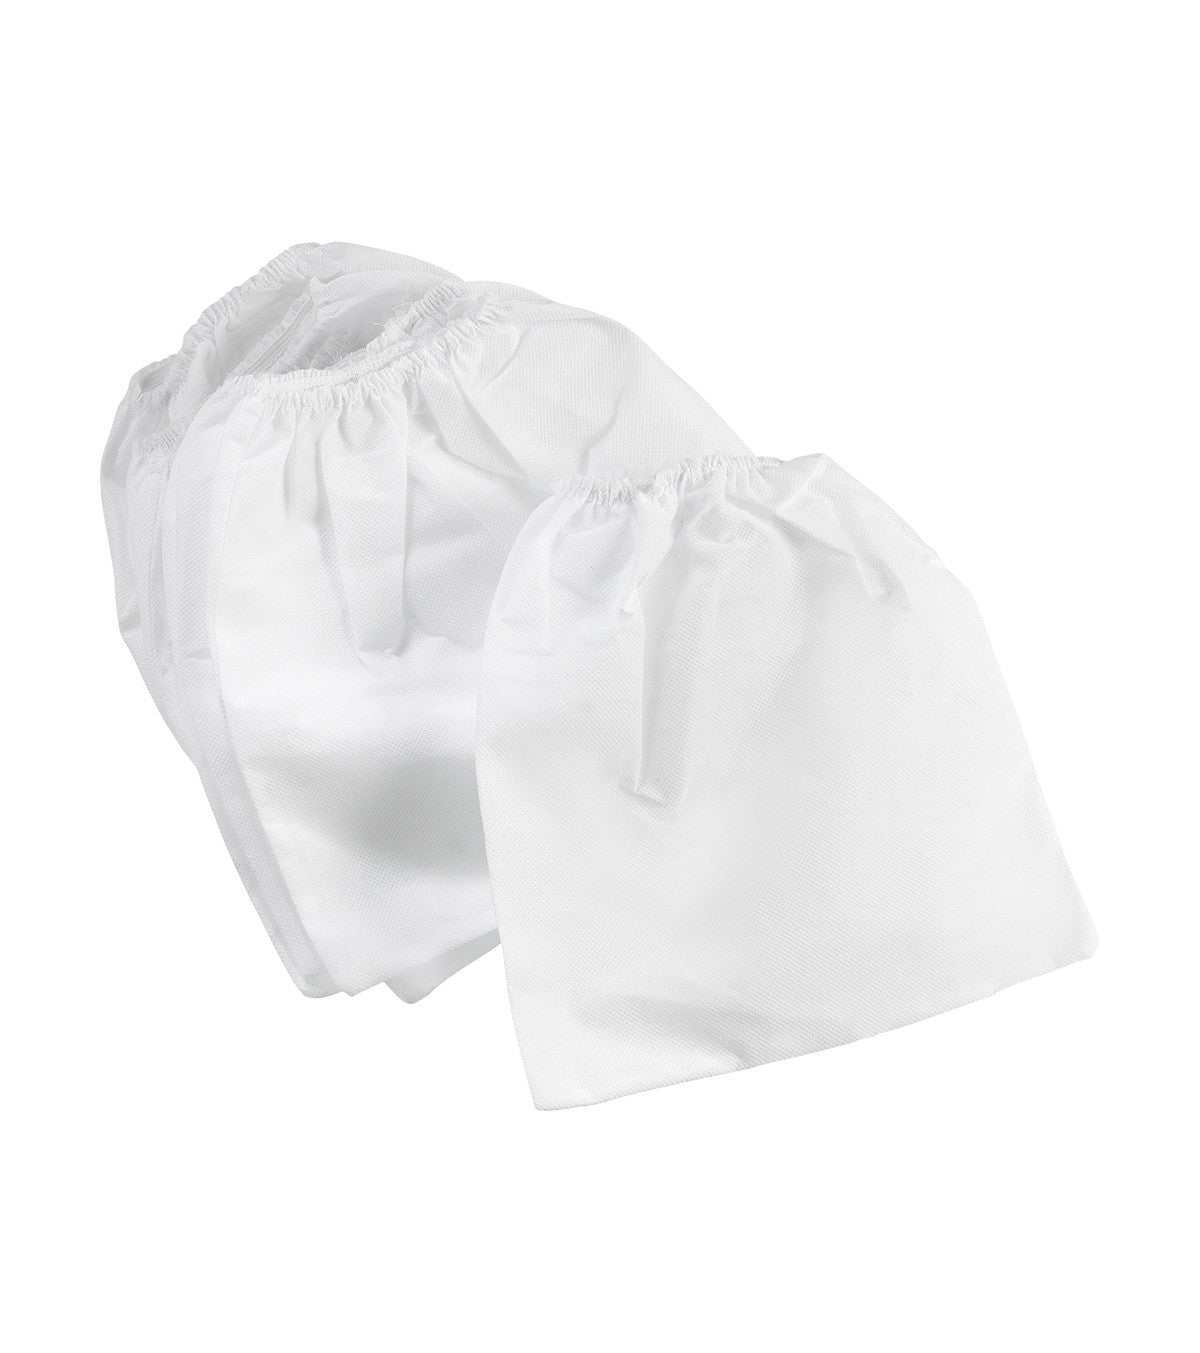 Extraction bags for Table extractor Ref 155254